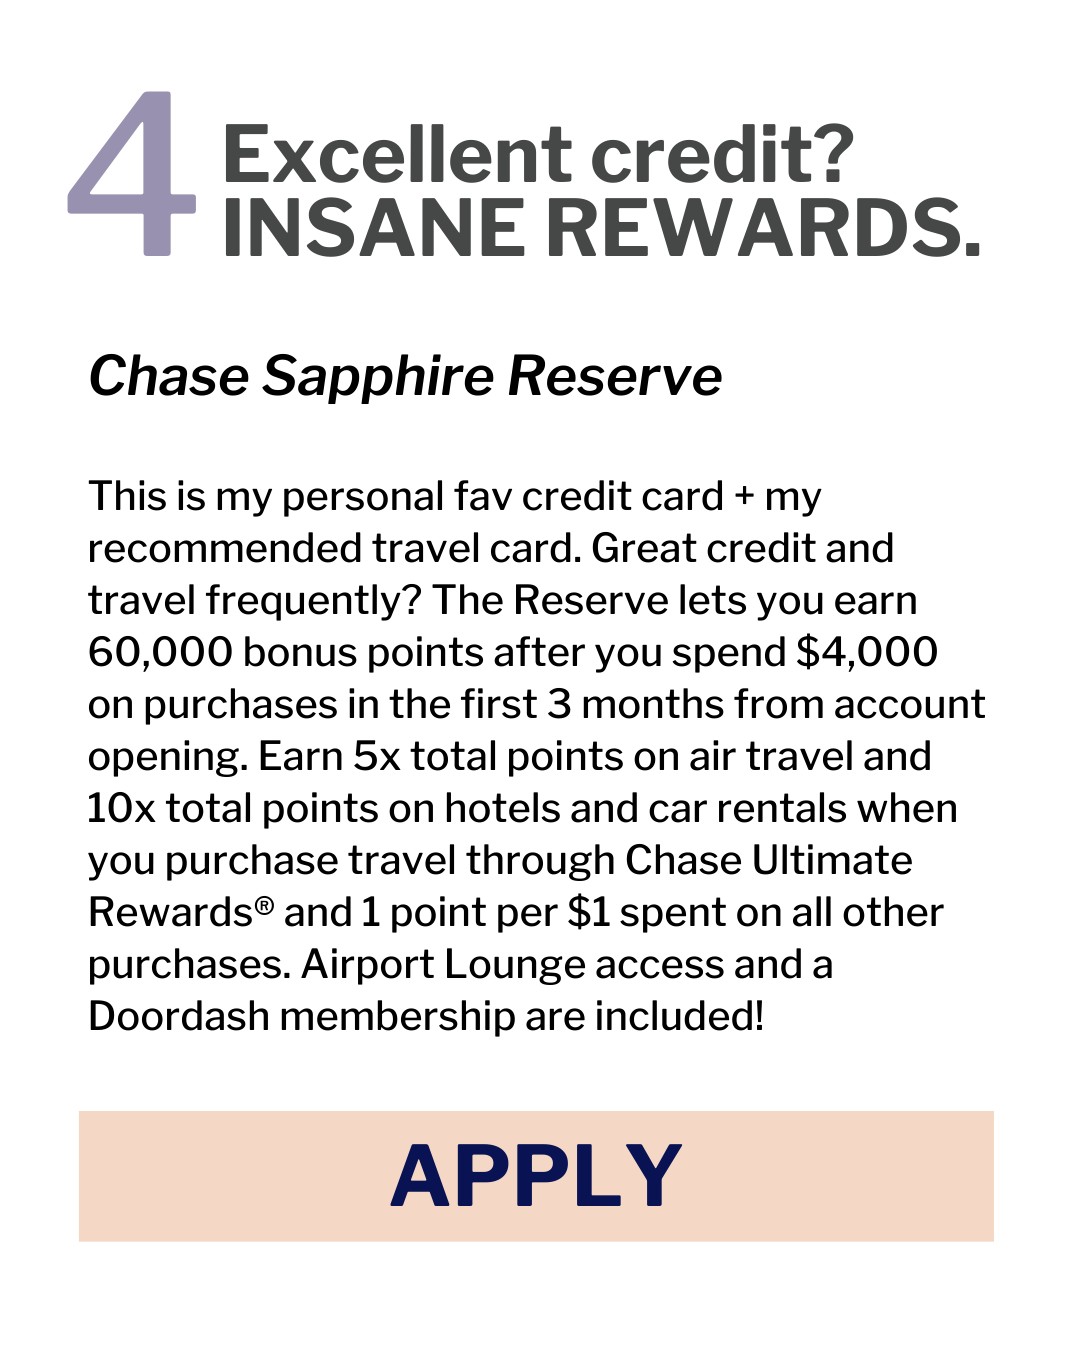 CC 4 - Chase Sapphire Res.png